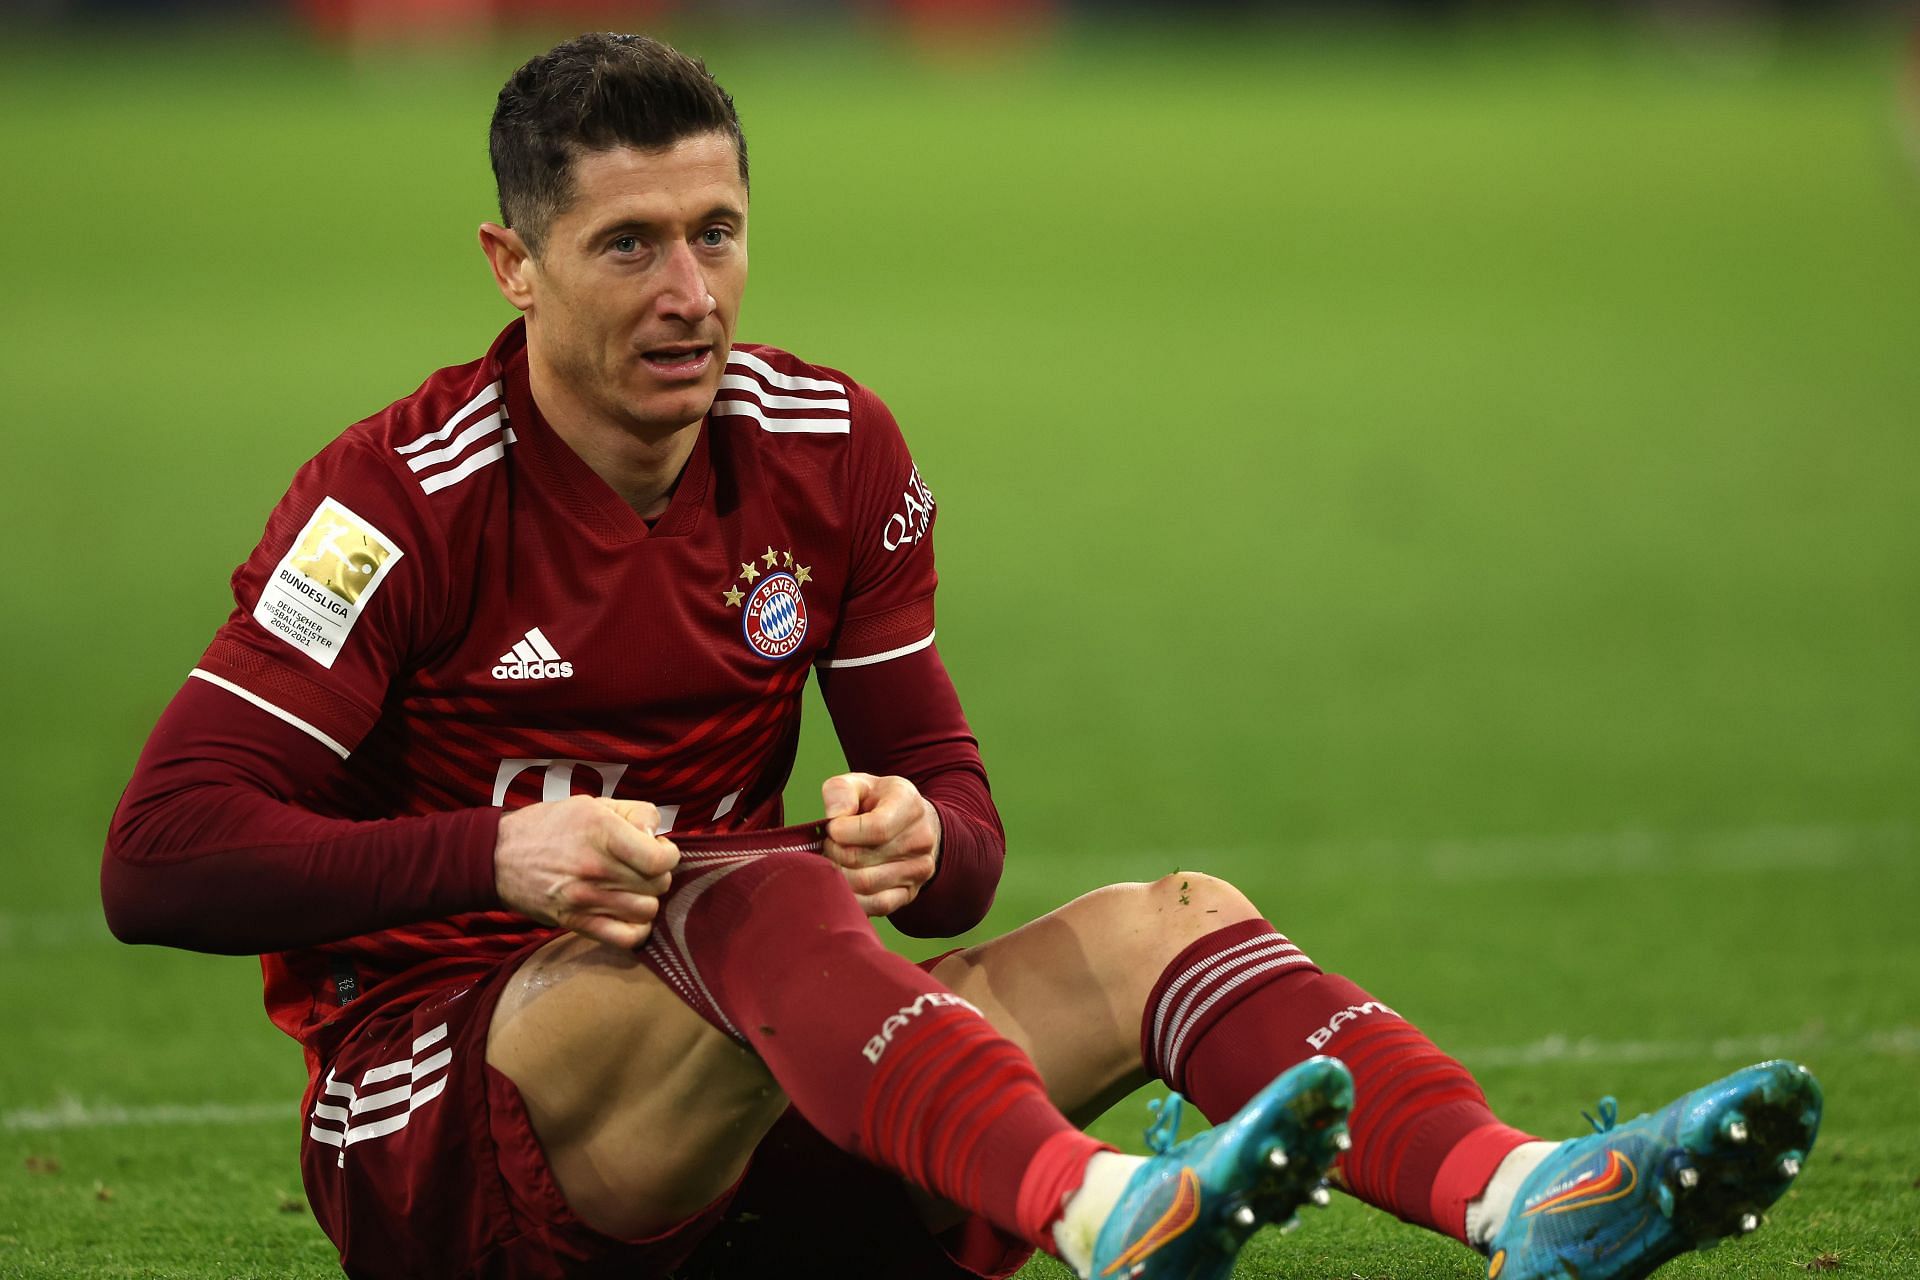 The Bayern Munich star has never faced Manchester United in his career